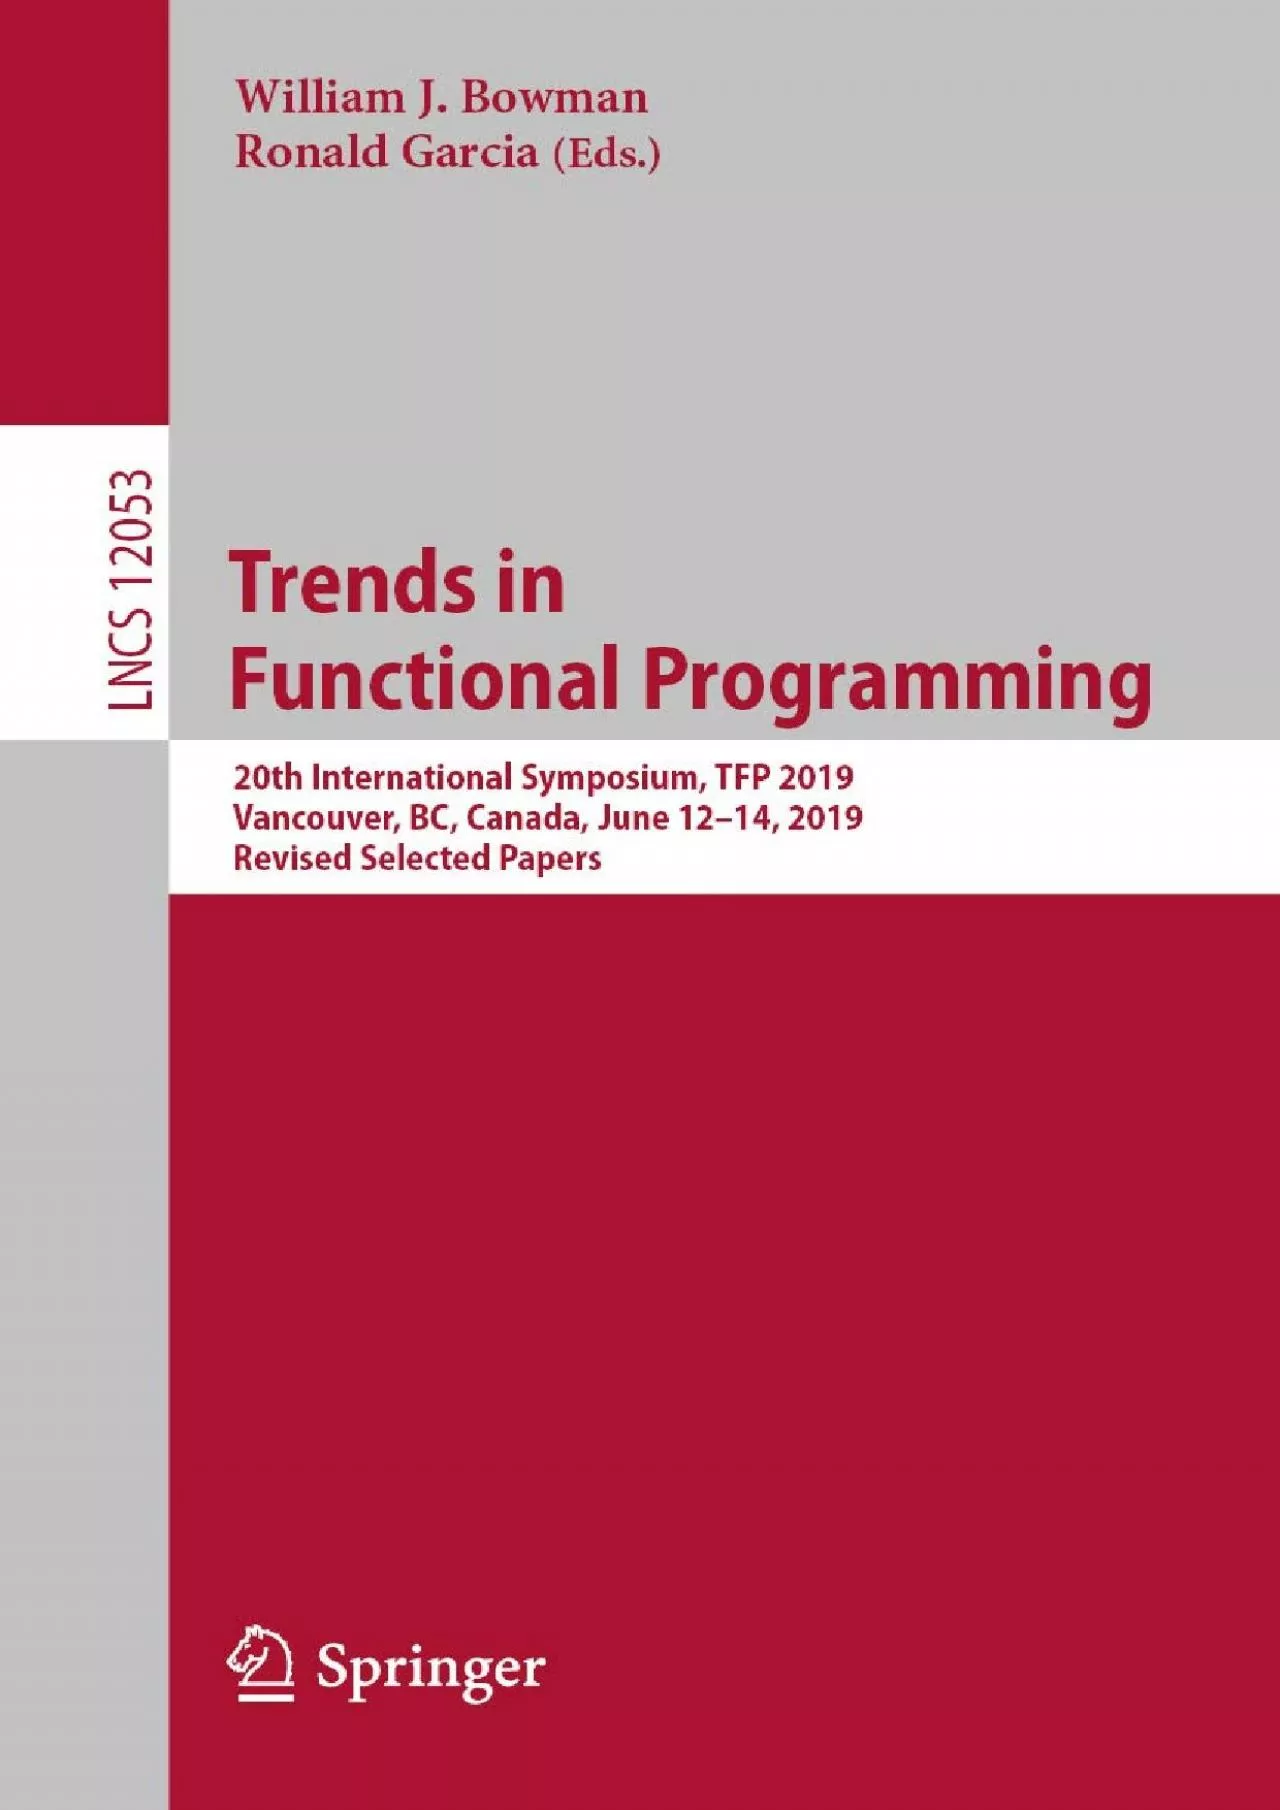 [DOWLOAD]-Trends in Functional Programming: 20th International Symposium, TFP 2019, Vancouver,